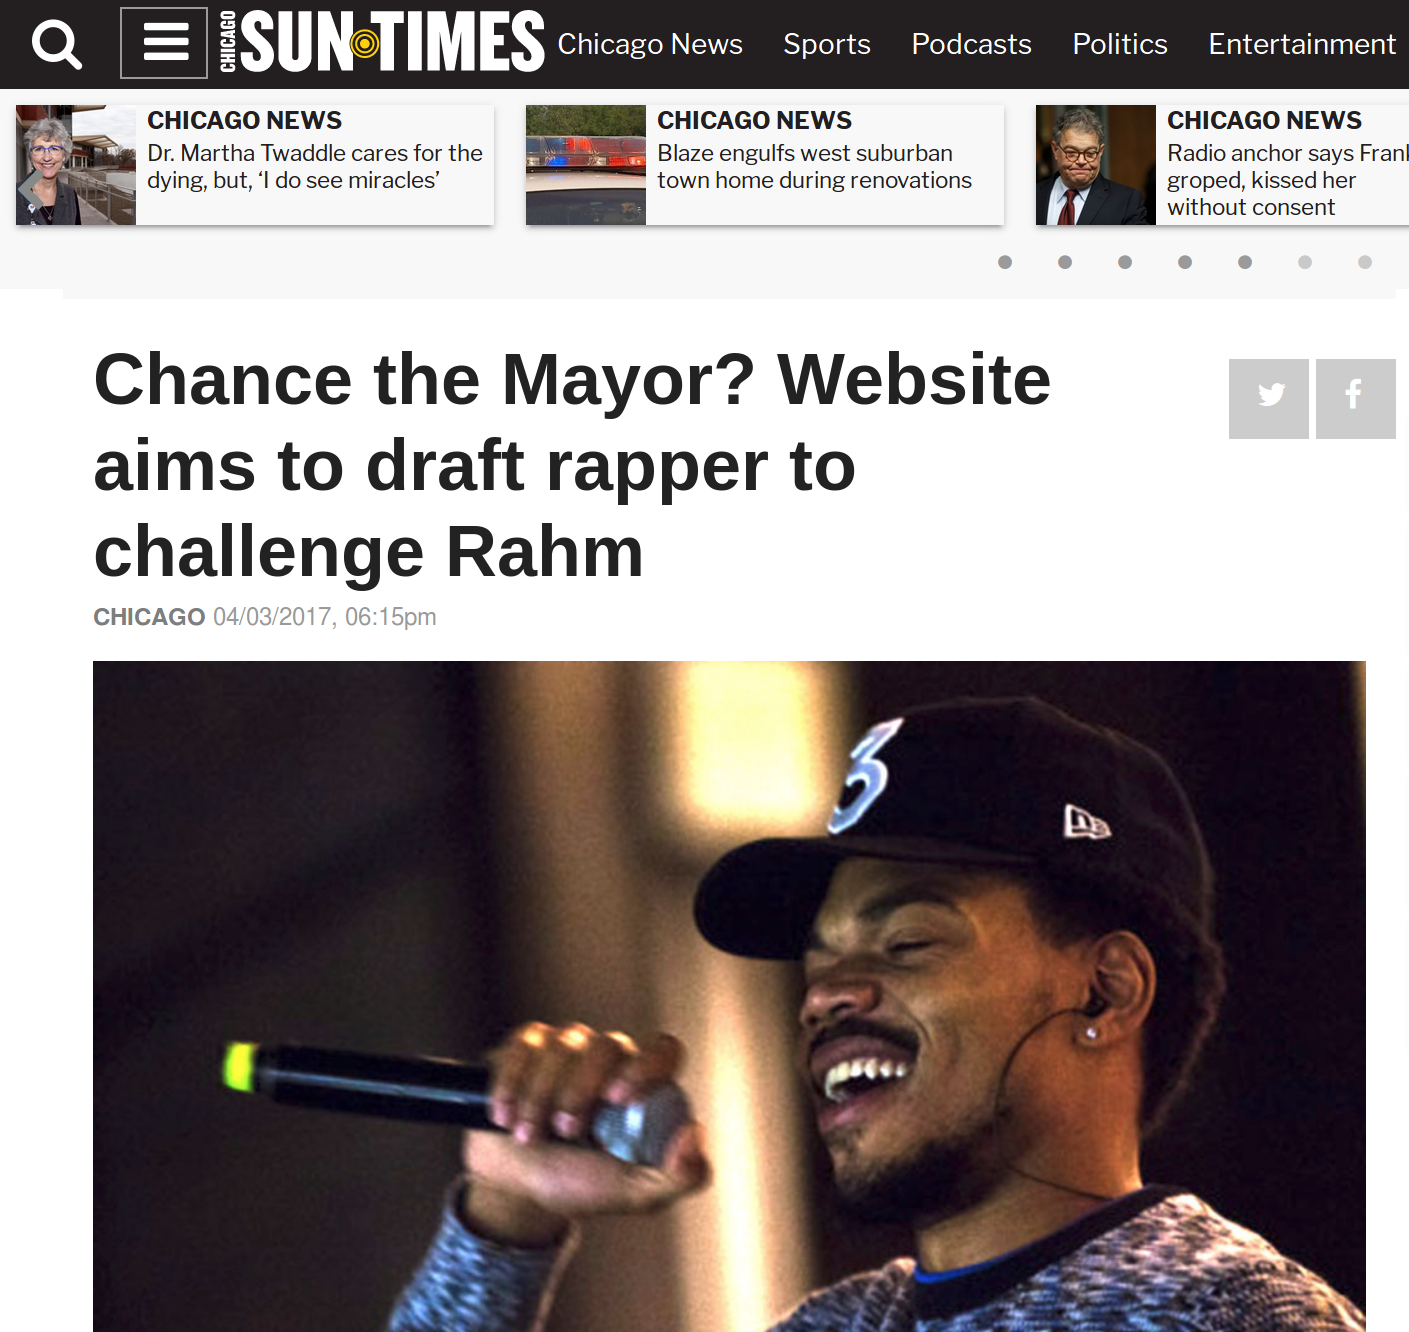 The Chicago Sun-Times